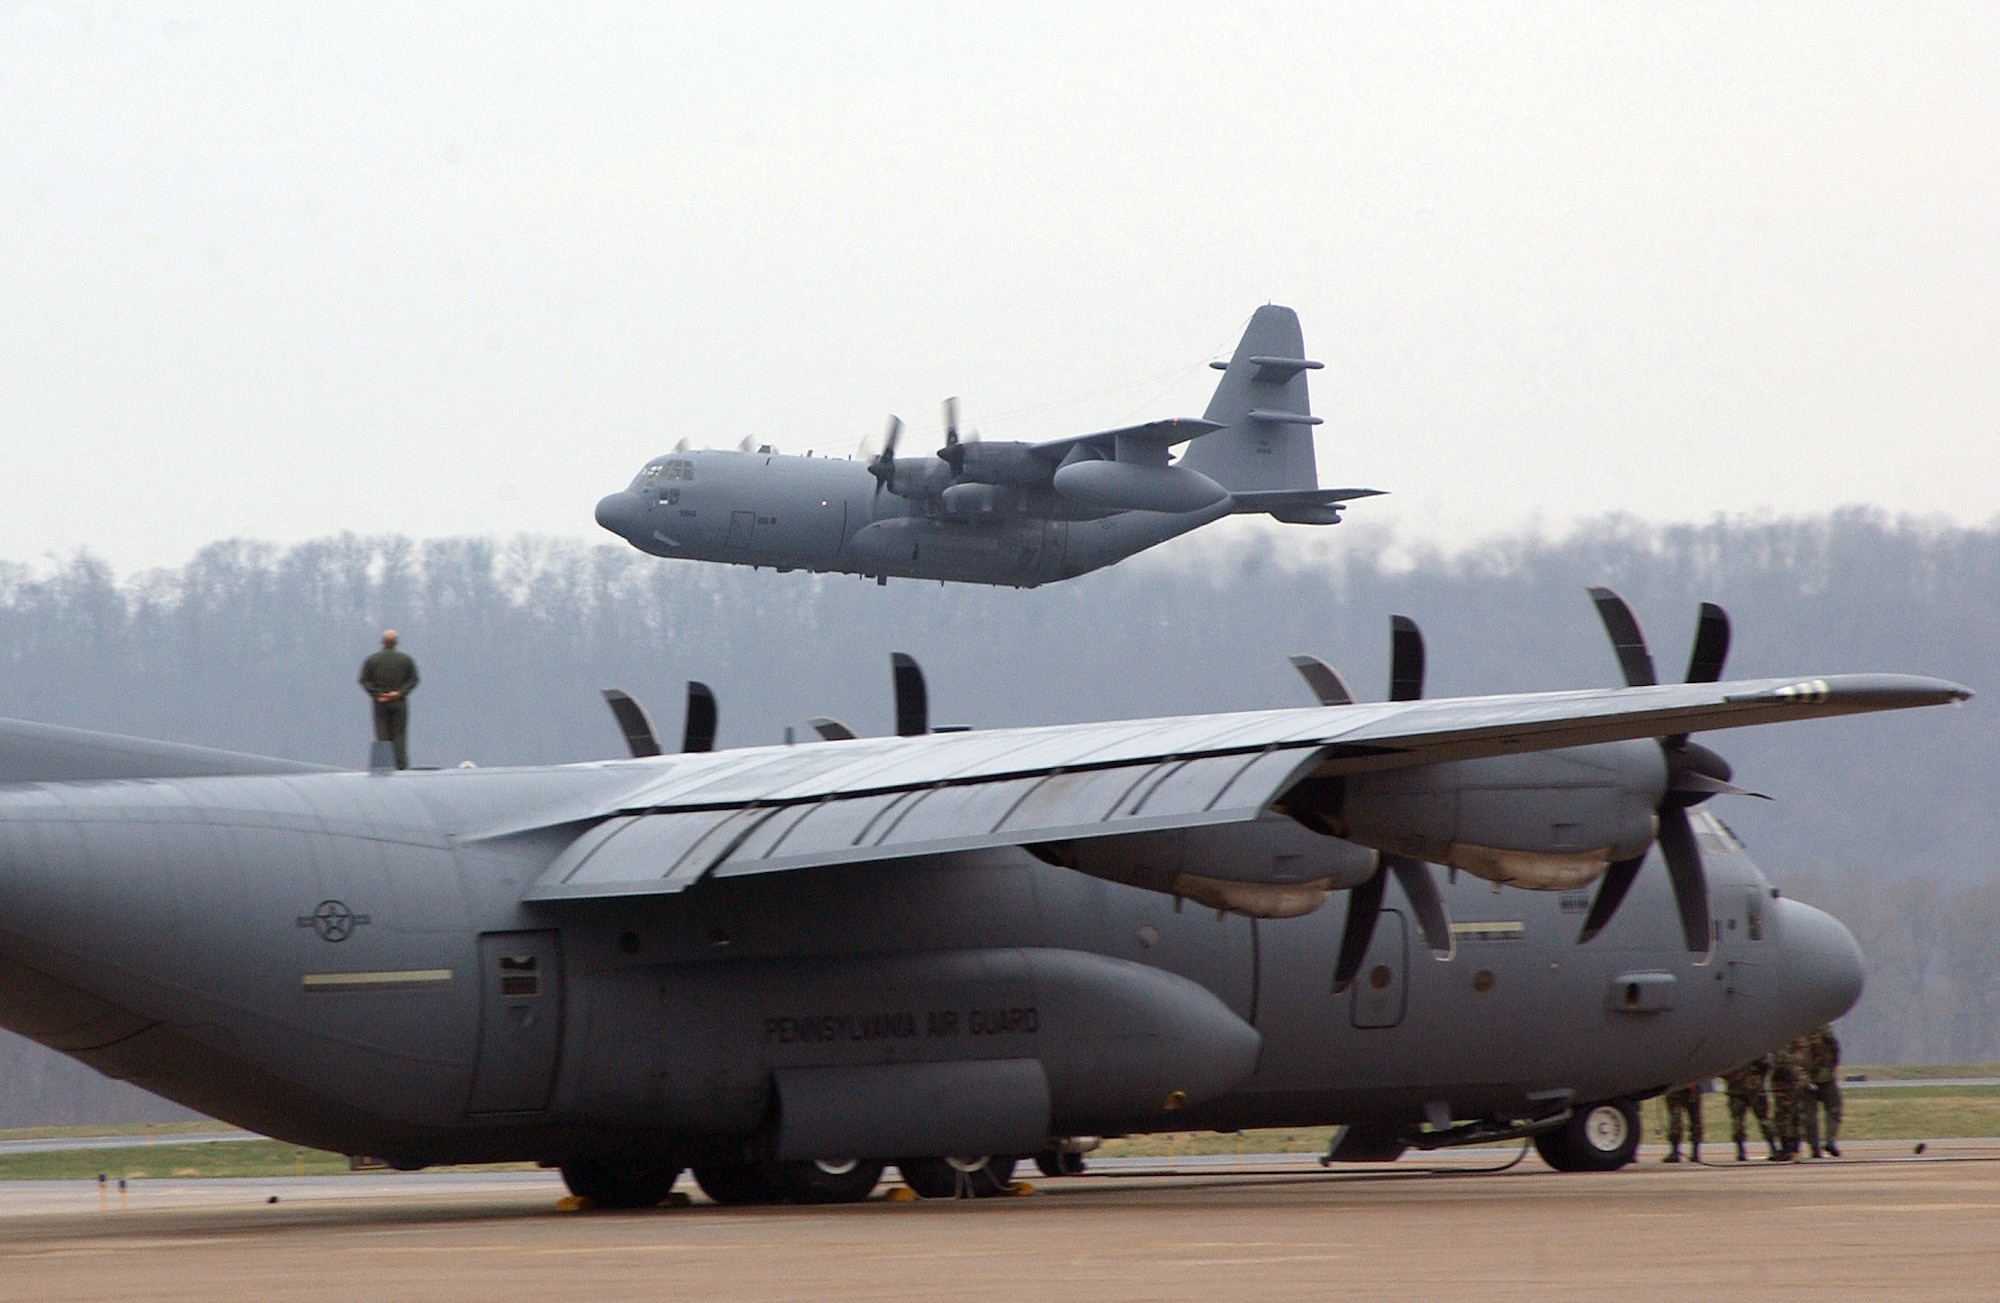 The last Air National Guard's EC-130E Commando Solo takes off above a C-130 Hercules for the final time at the Harrisburg International Airport on Monday, April 3, 2006.  The "E" model has flown members of the 193rd Special Operations Wing into combat since the Vietnam Conflict. (U.S. Air Force photo/Staff Sgt. Matt Schwartz)